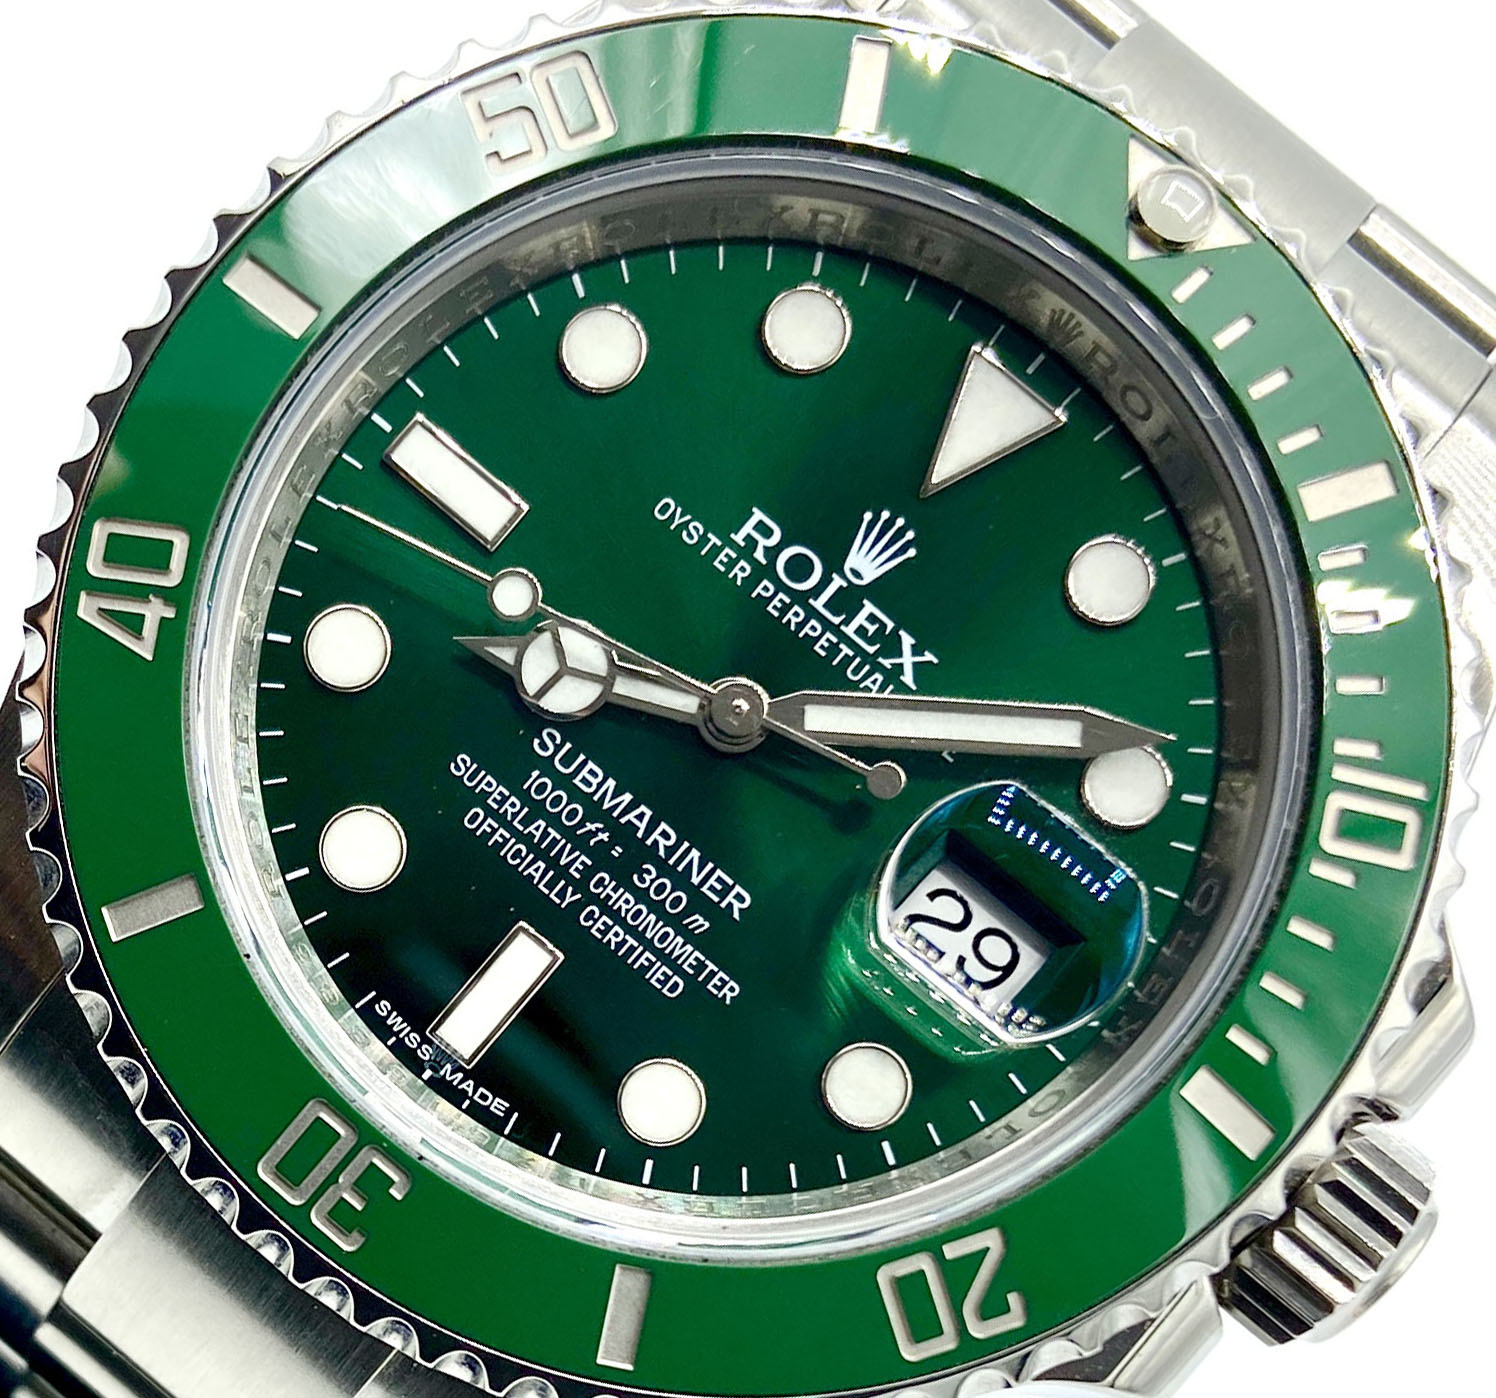 Rolex Submariner Date 116610LV 40mm Green Dial with Stainless Steel Bracelet